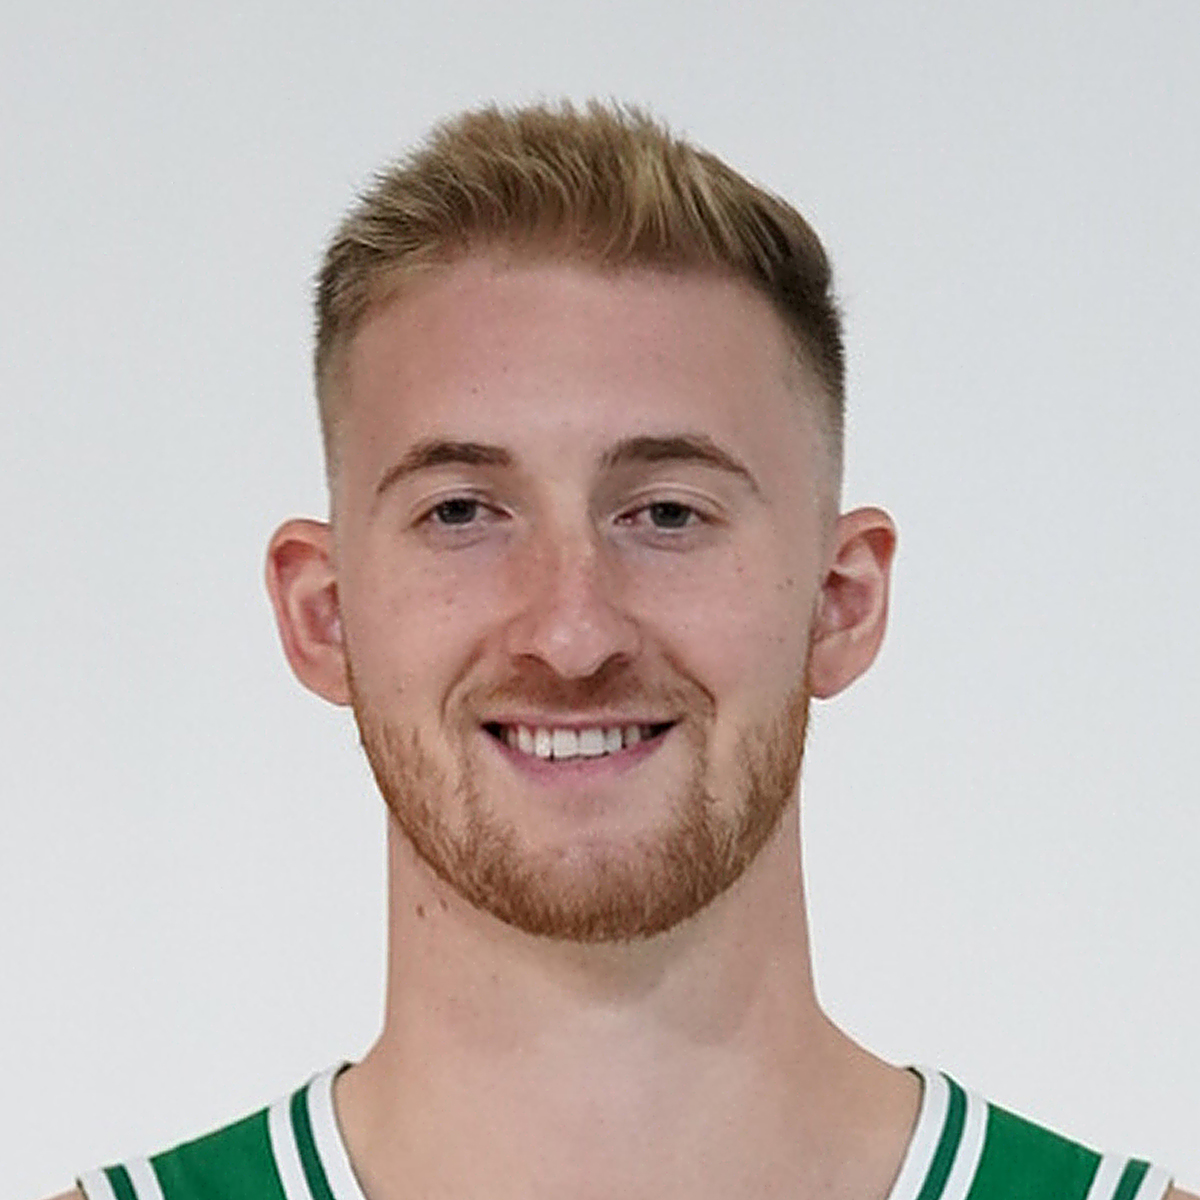 Celtics to ‘explore converting Sam Hauser to a standard contract’ after flurry of trade deadline deals: report